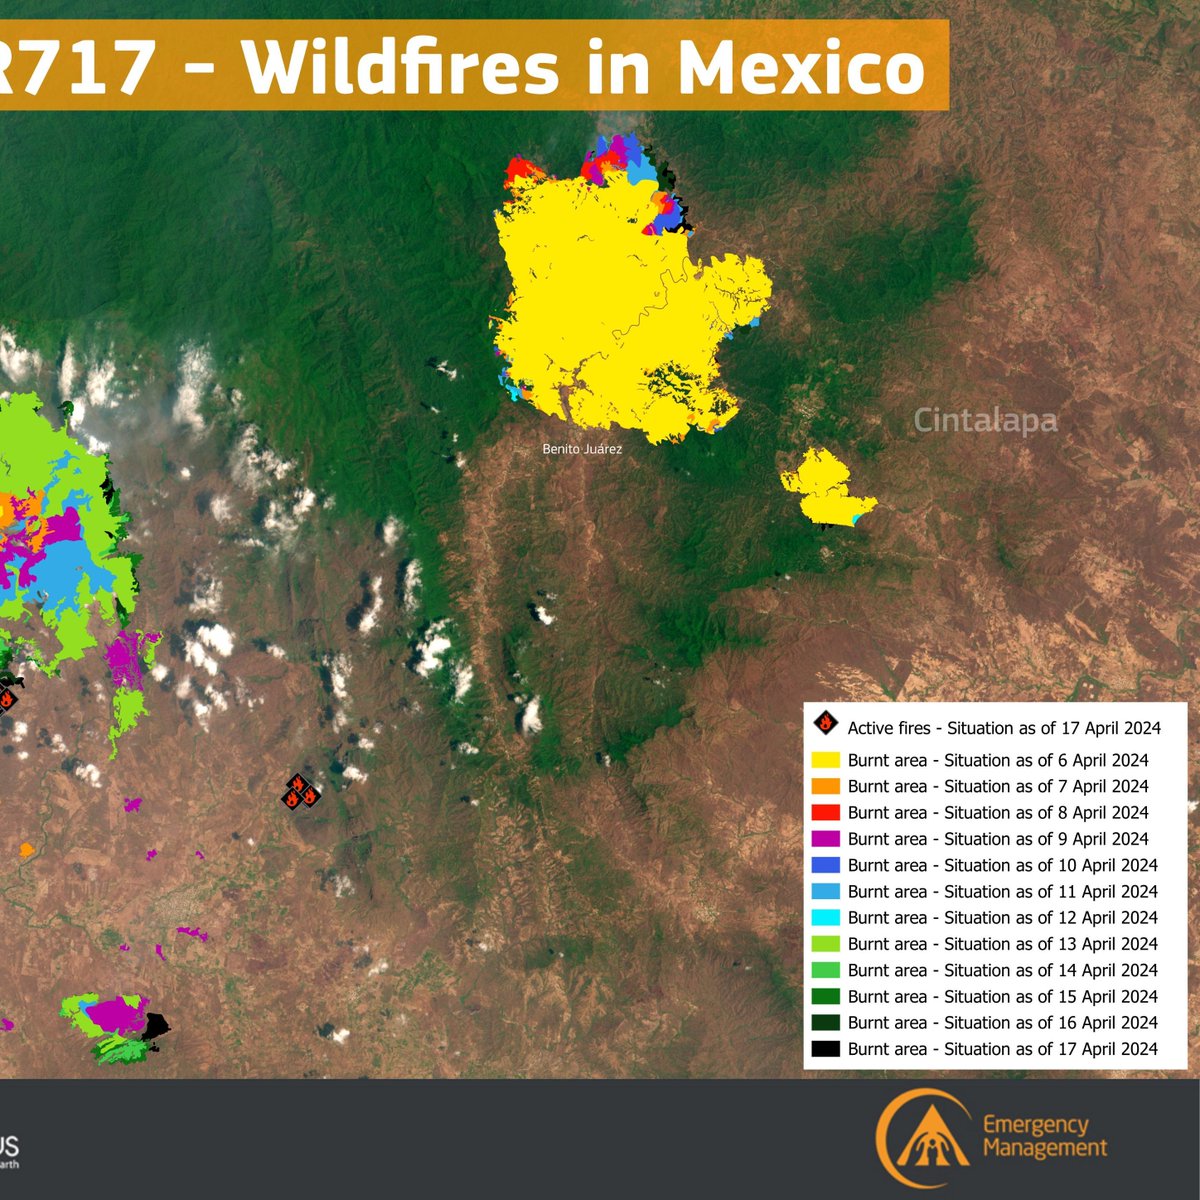 Wildfires rage across Central America, threatening health, livelihoods, and the environment. @CopernicusEMS, part of the EU Space Programme, aids with rapid mapping for damage assessment in Guatemala (EMSR727), Belize (EMSR726), and Mexico (EMSR717). acortar.link/9q4N0o